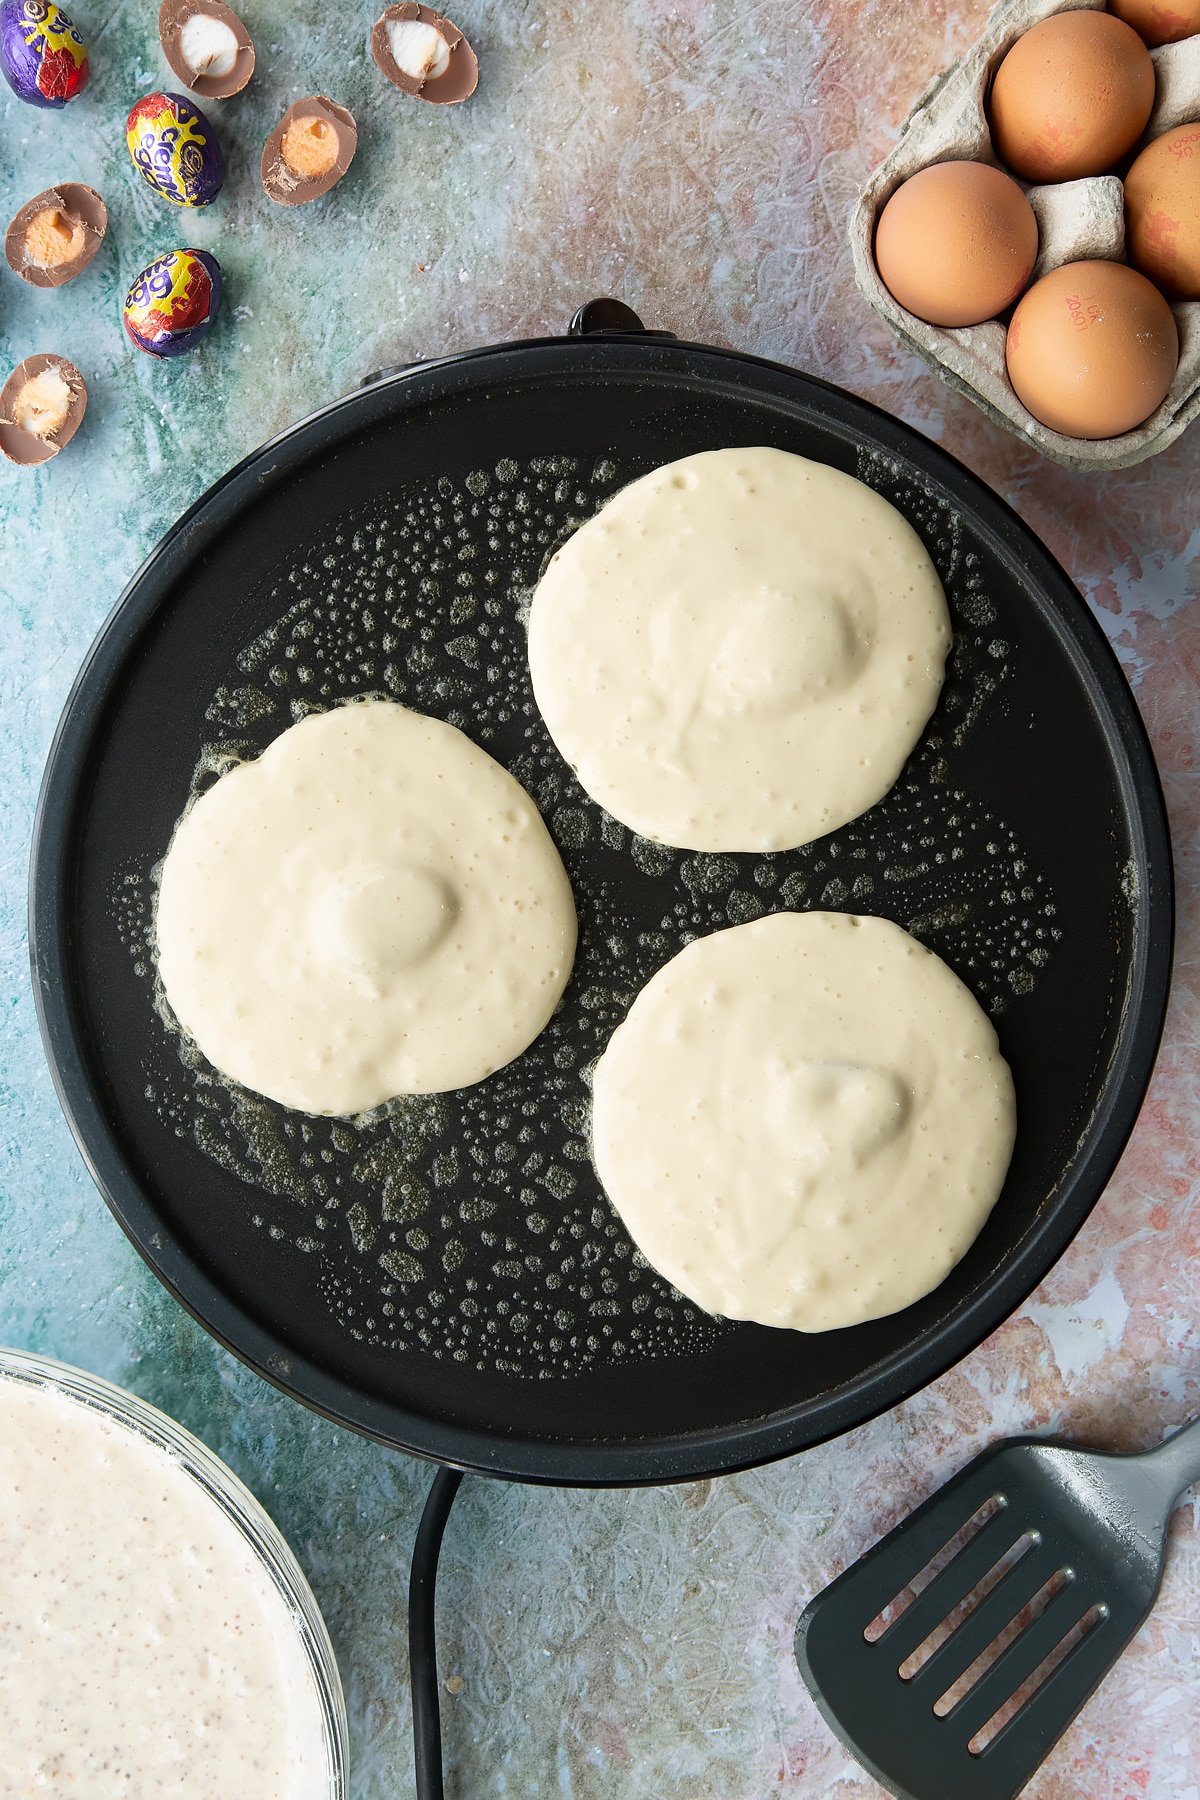 A hot pan with three scoops of pancake batter stuffed with Creme Egg mini halves. Ingredients to make Creme Egg pancakes surround the pan.